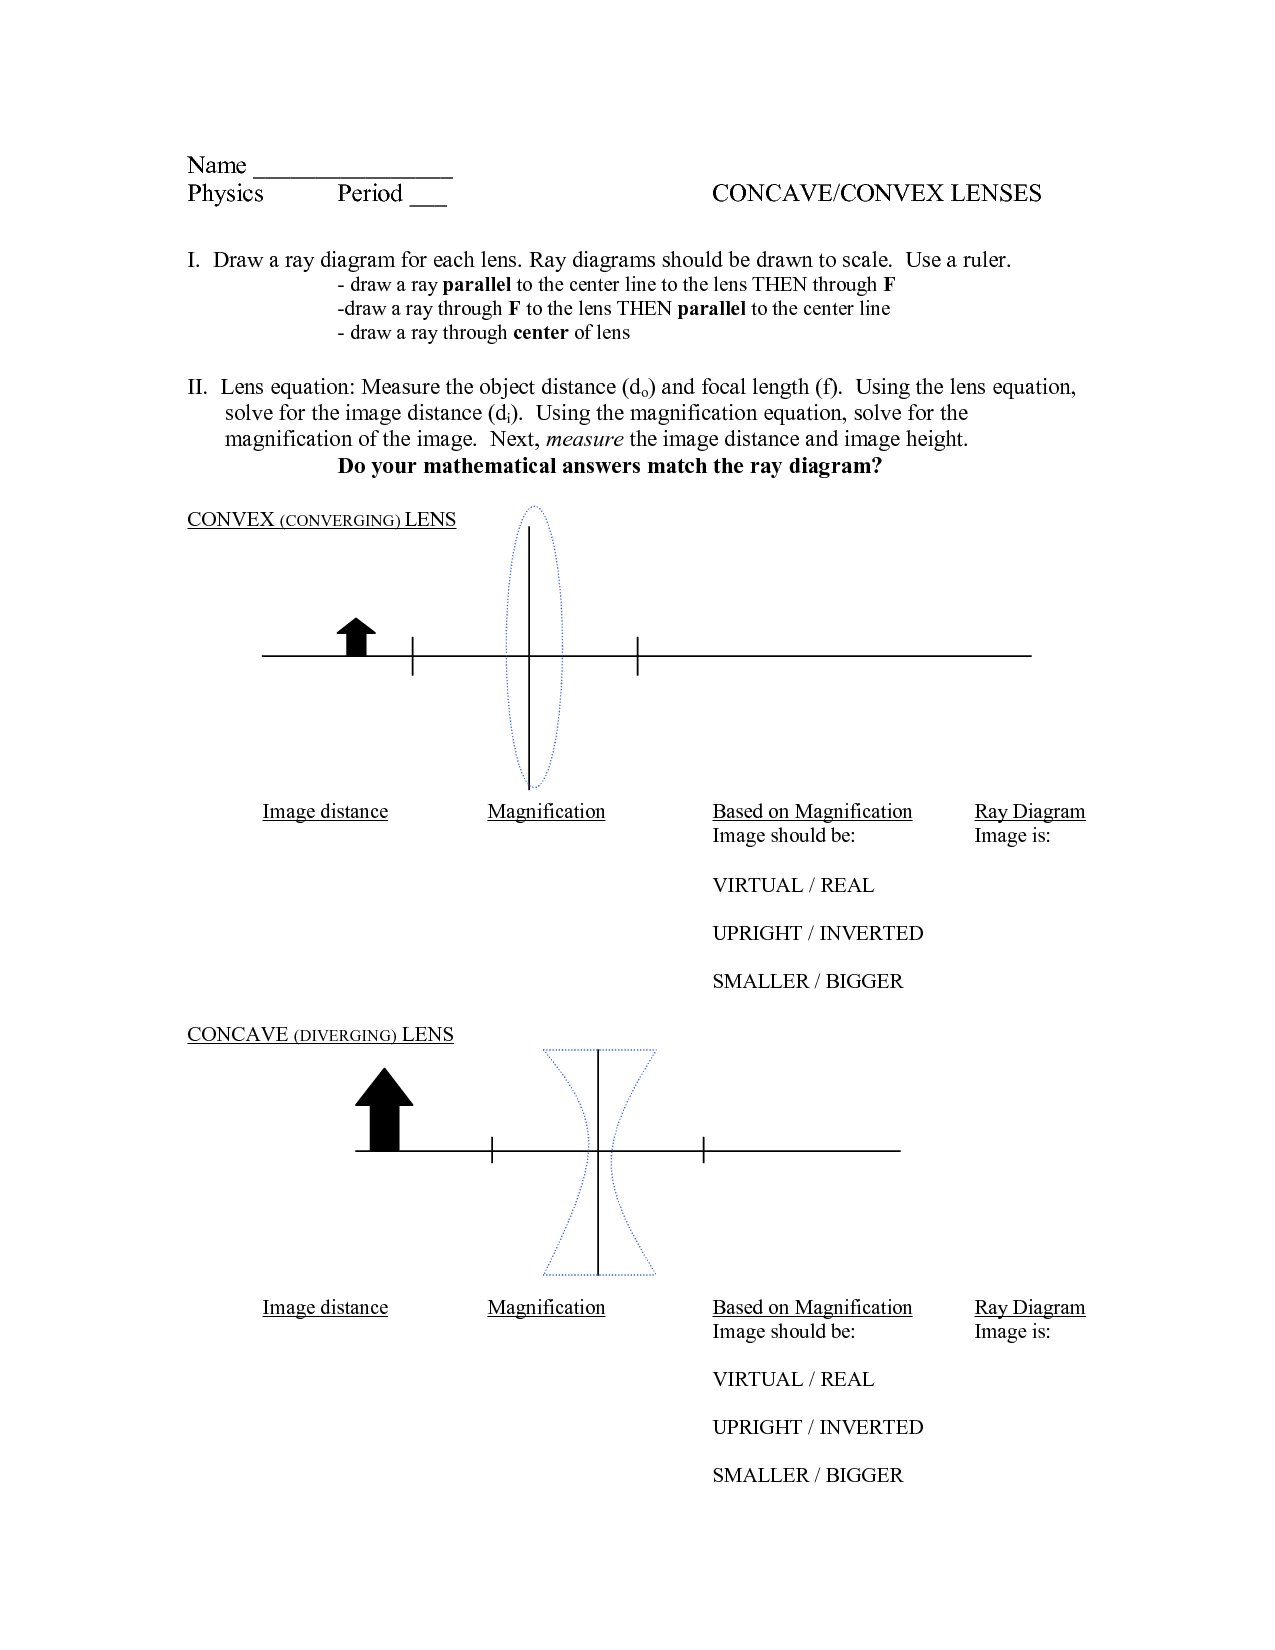 17-best-images-of-mirrors-and-lenses-worksheet-concave-mirror-ray-diagram-worksheet-diverging